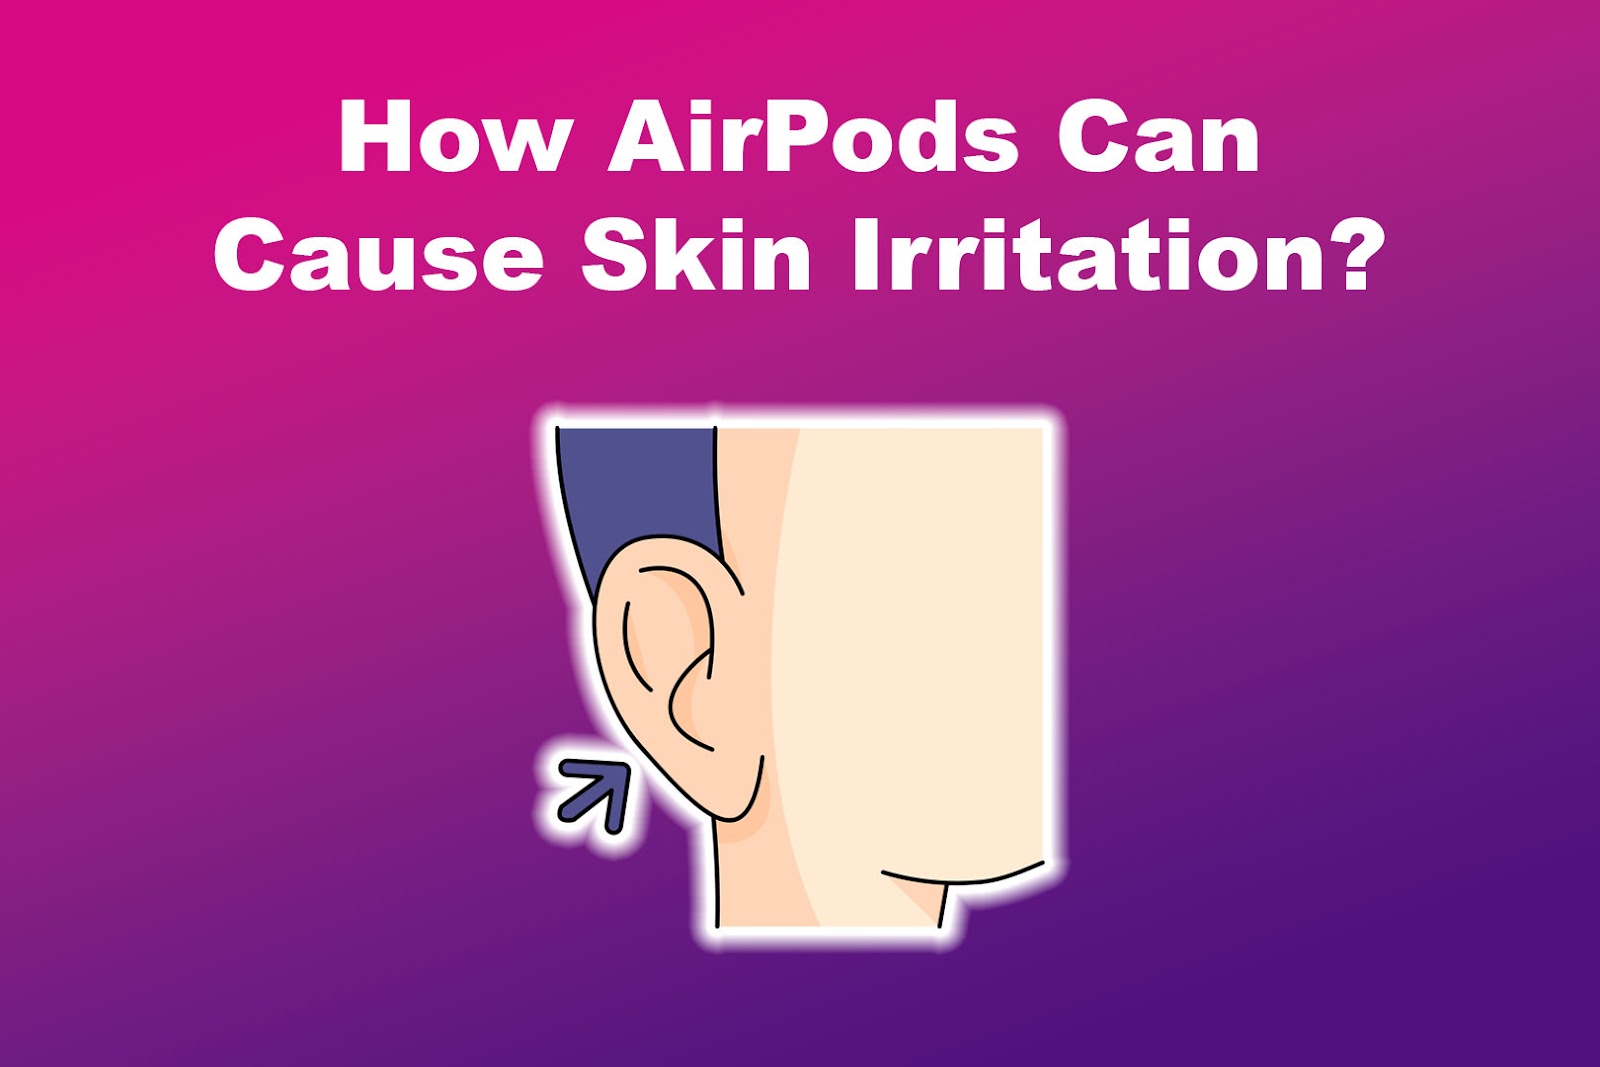 How AirPods Can Cause Skin Irritation